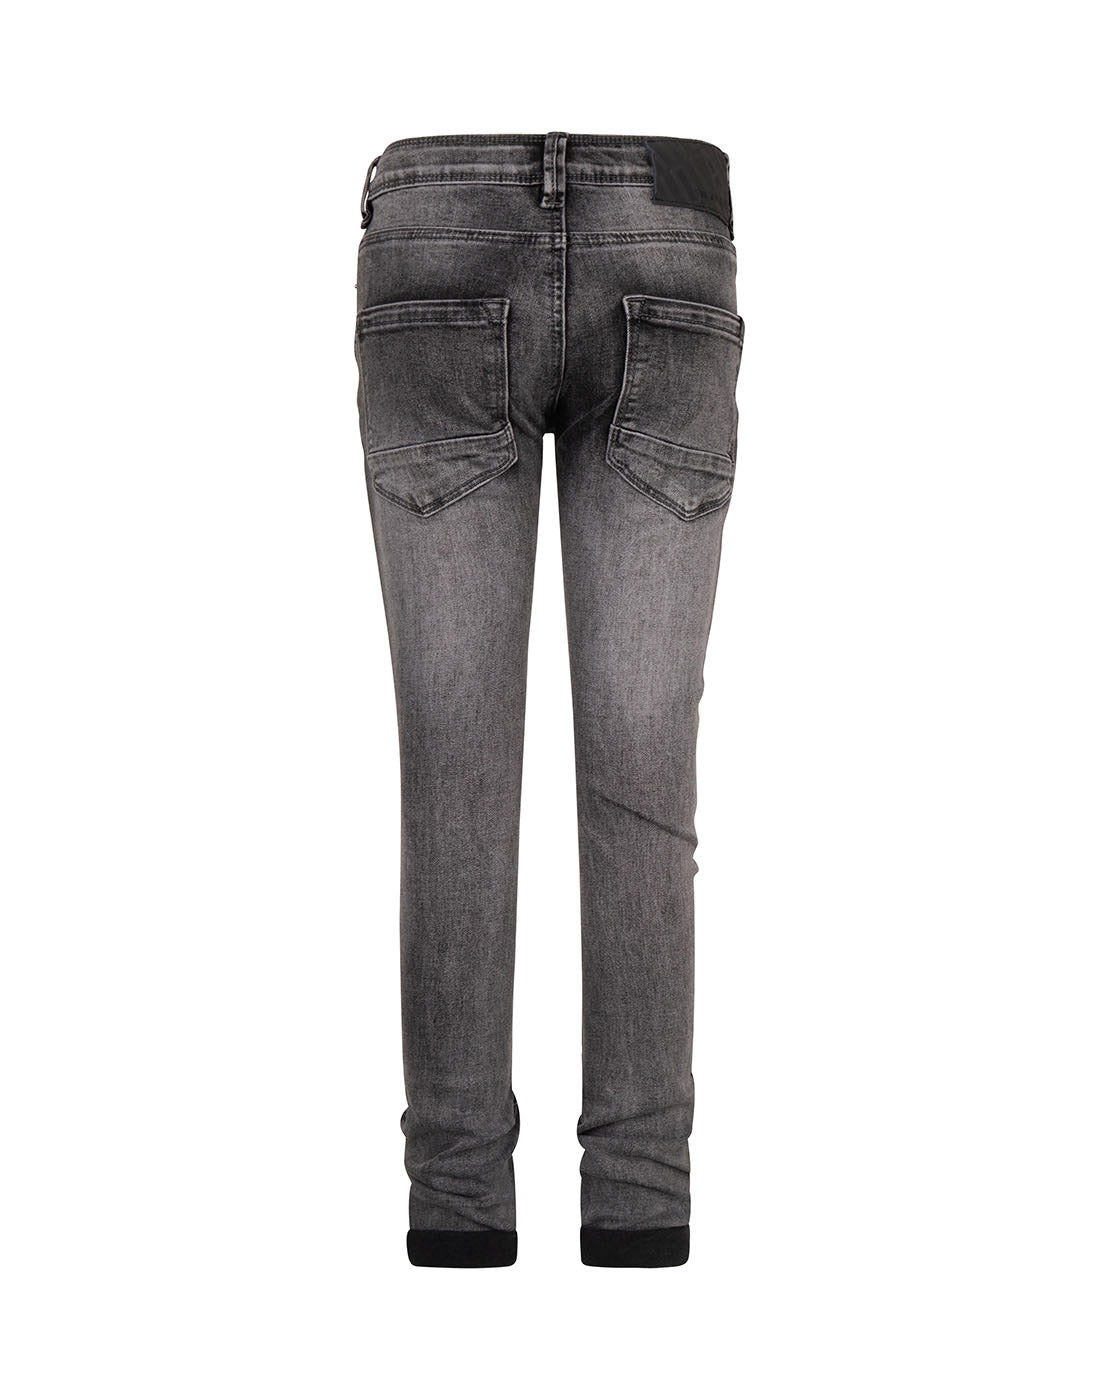 Indian Blue Jeans Jeans Gray Brad Super Skinny Fit